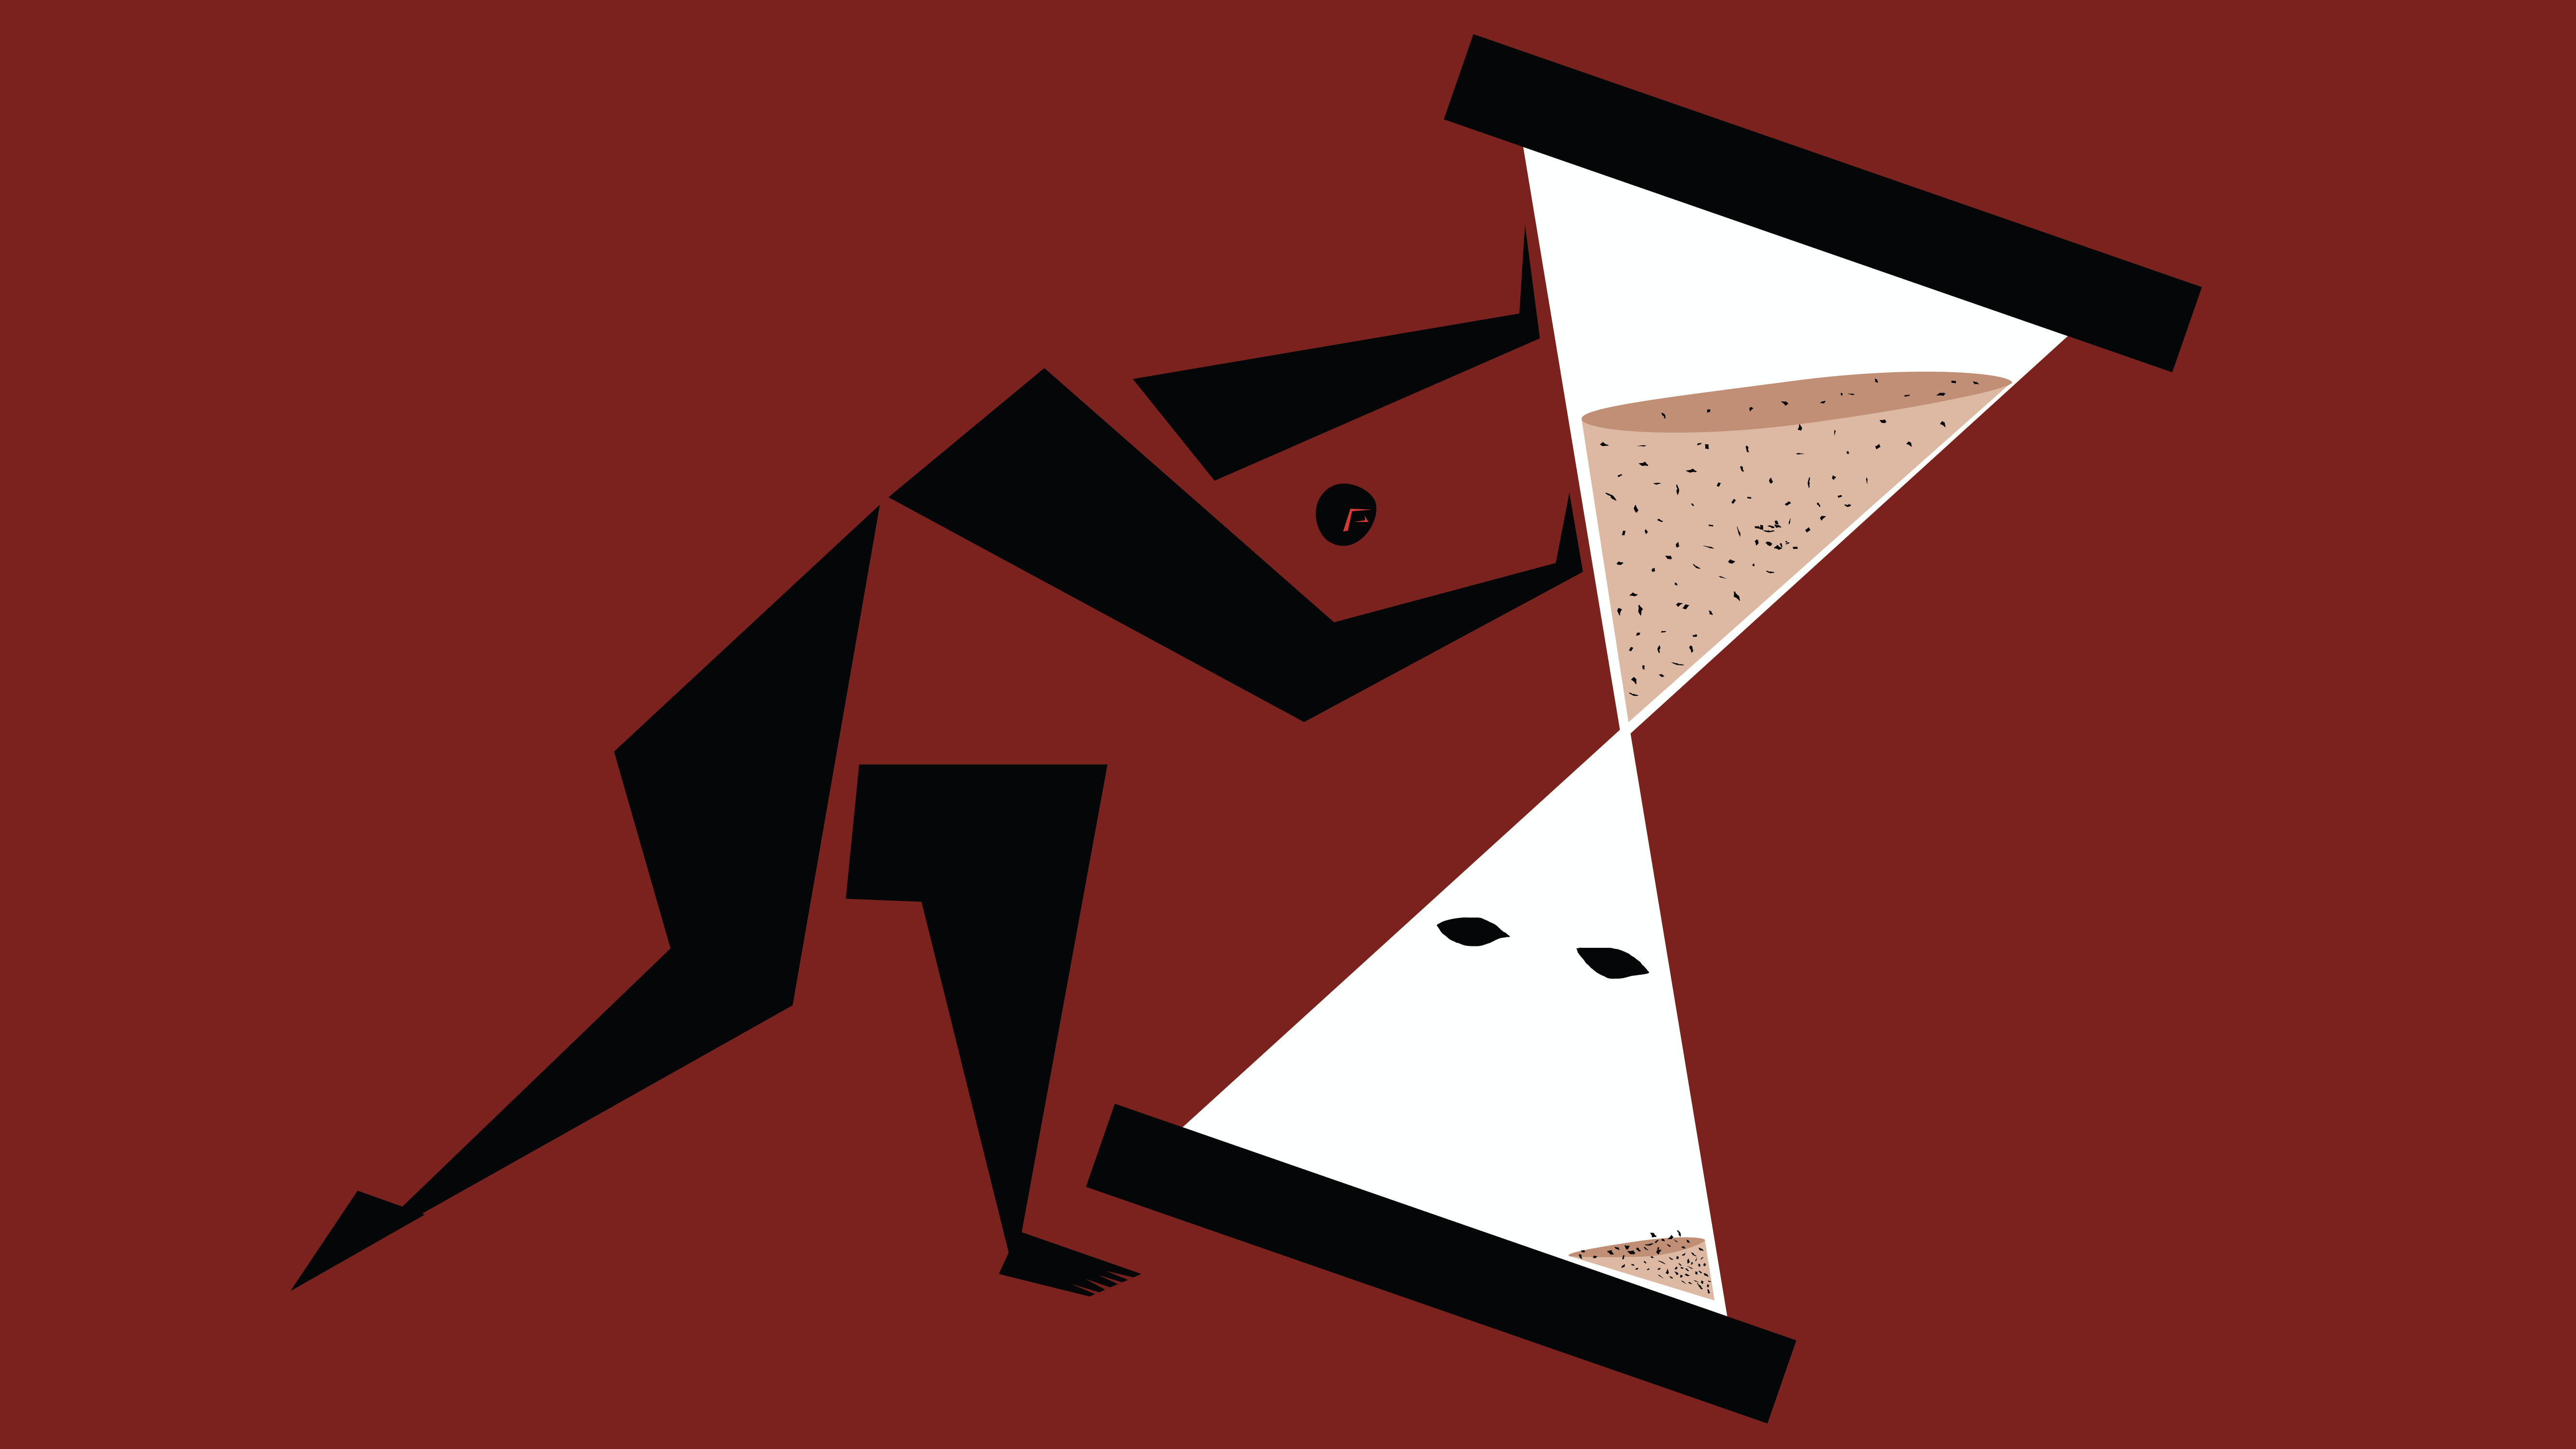 An illustration: Against a dark red background, a stylized figure made of large black triangles (and who has a little circle for a head) struggles to topple a giant hourglass. The top is full; the bottom is mostly empty, specks of sand floating down through its white void evoke a KKK hood.